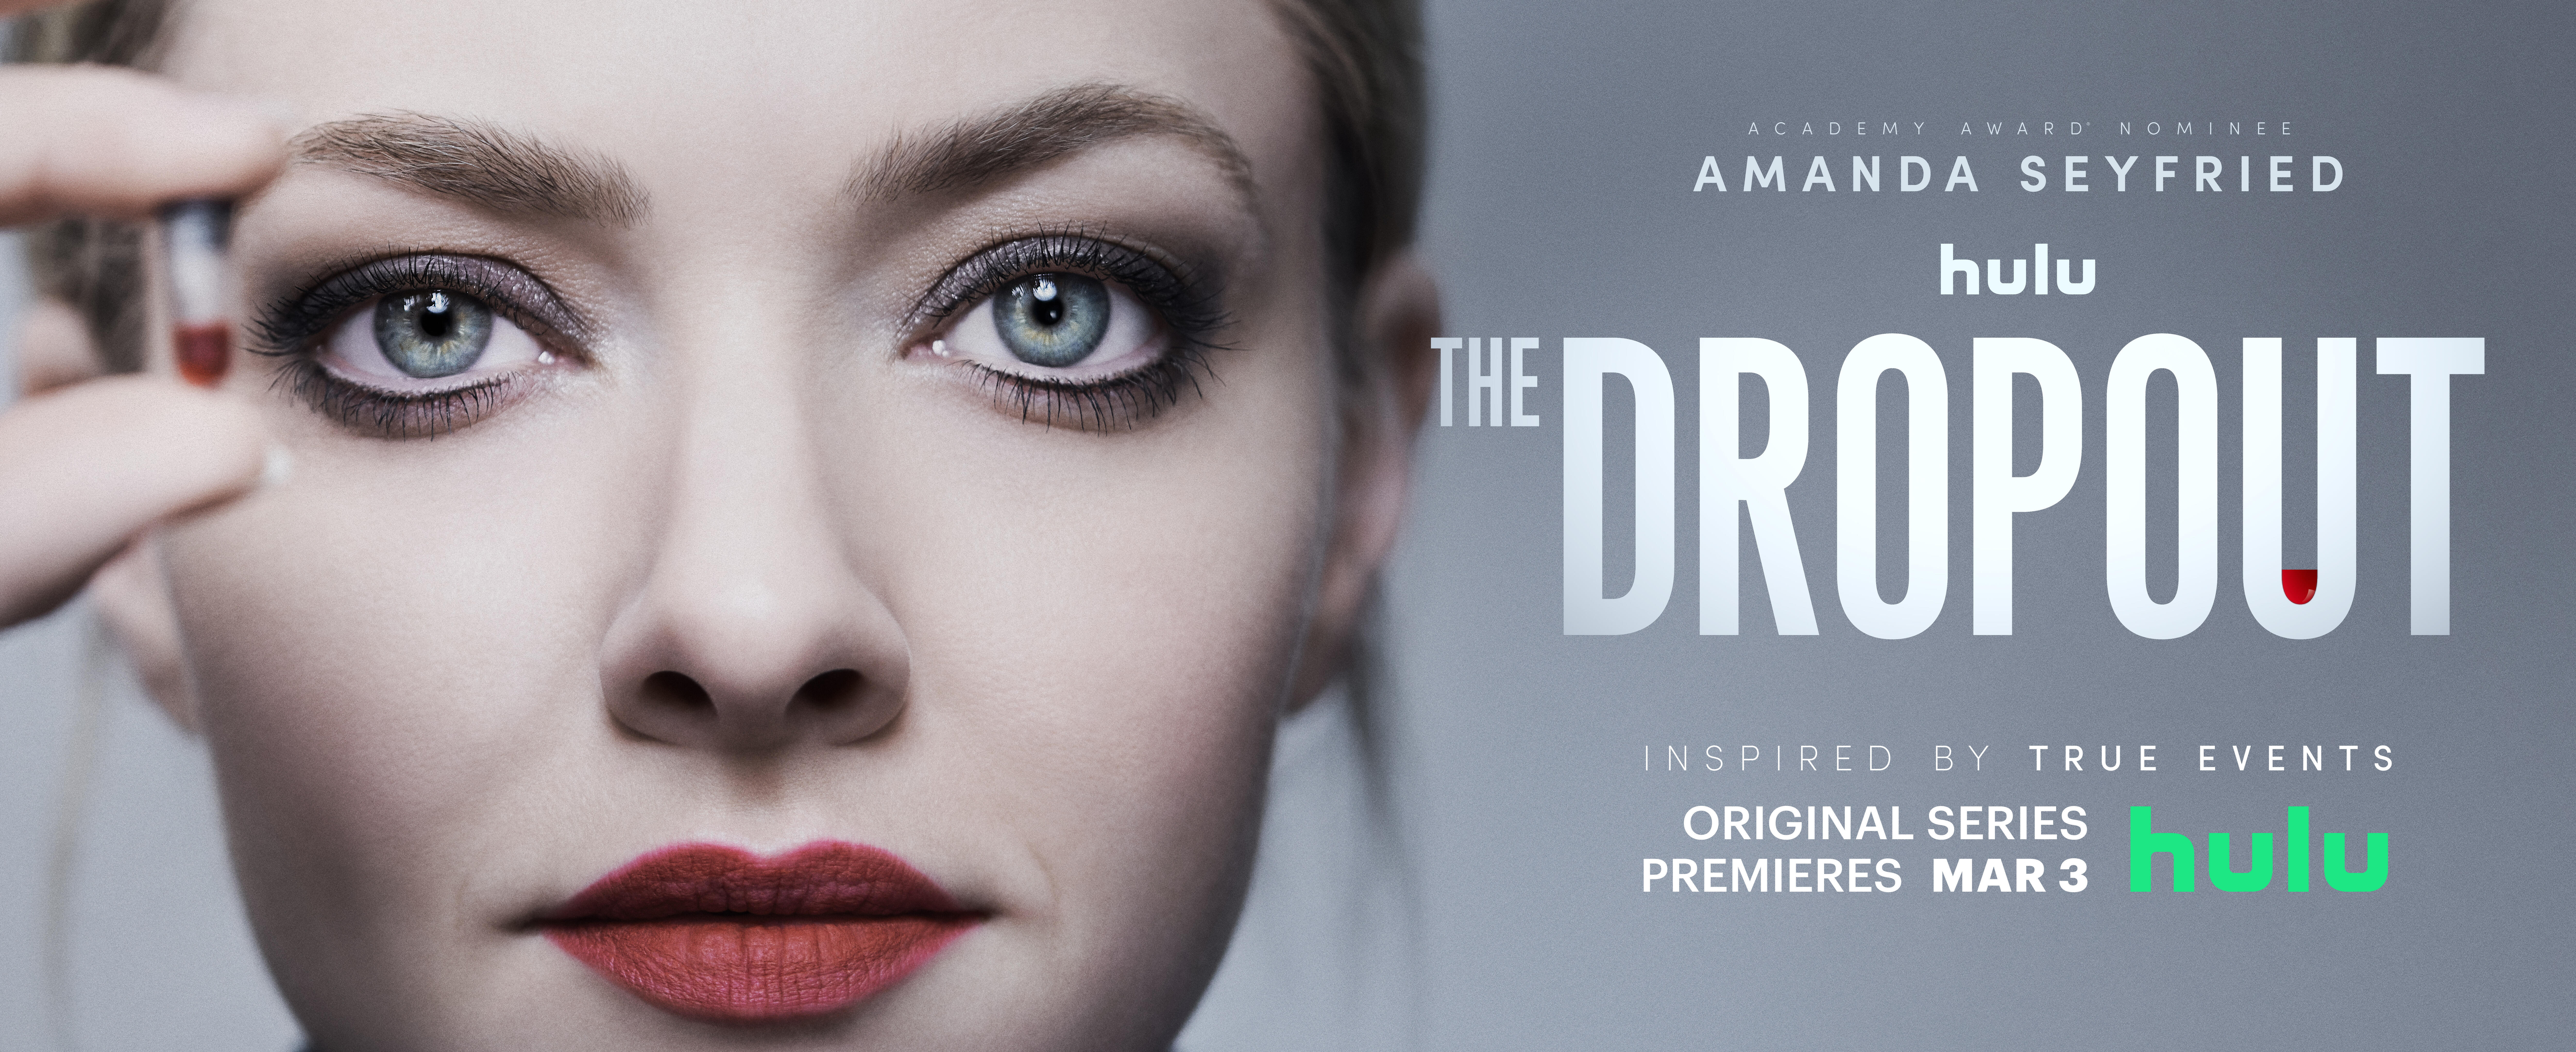 ‘The Dropout’ Review: From ‘Mean Girls’ to Mean Girl; Amanda Seyfried is Mesmerising as Theranos Fraudster